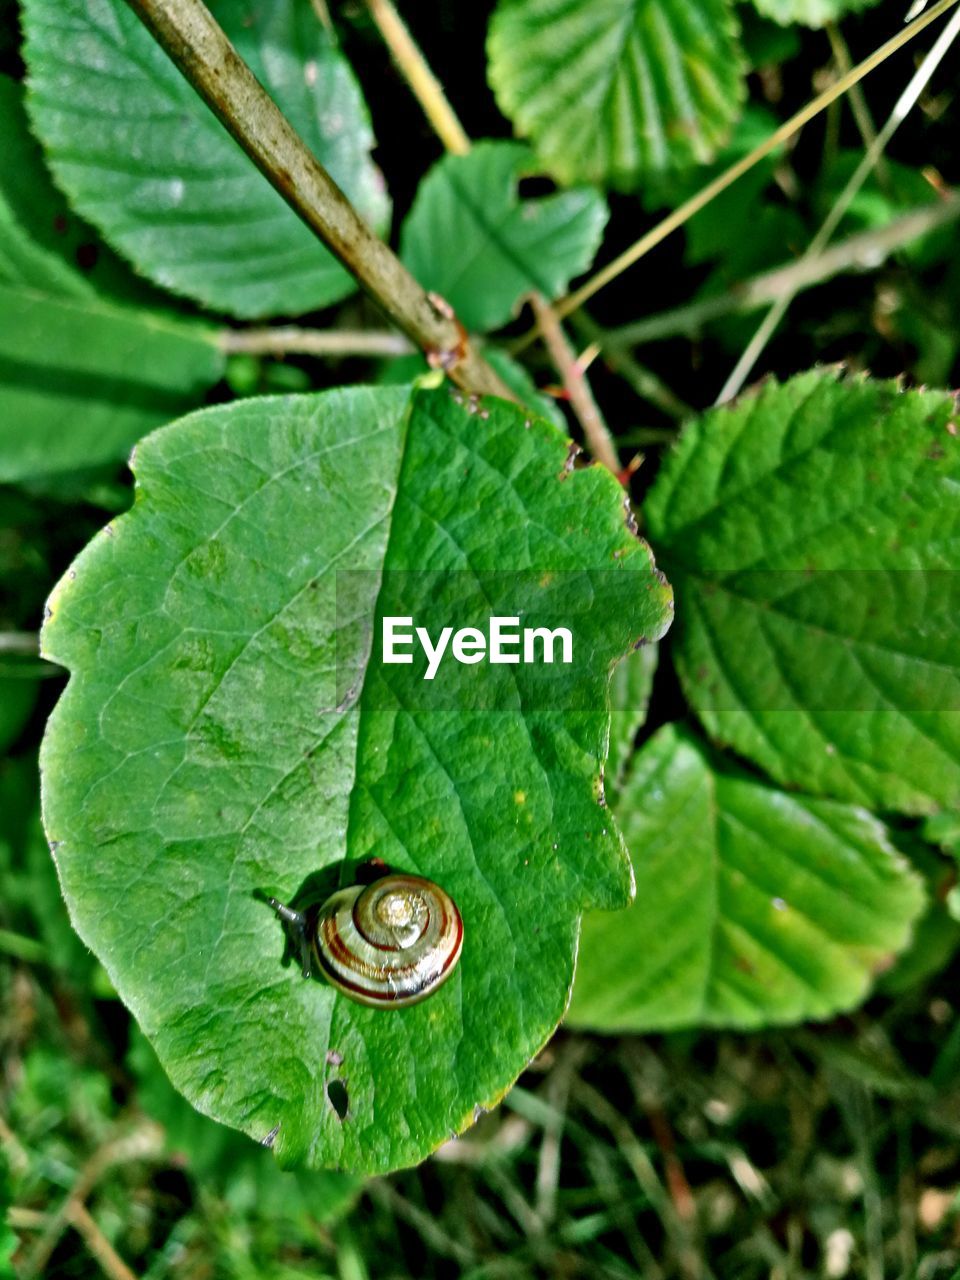 CLOSE-UP OF A SNAIL ON LEAF